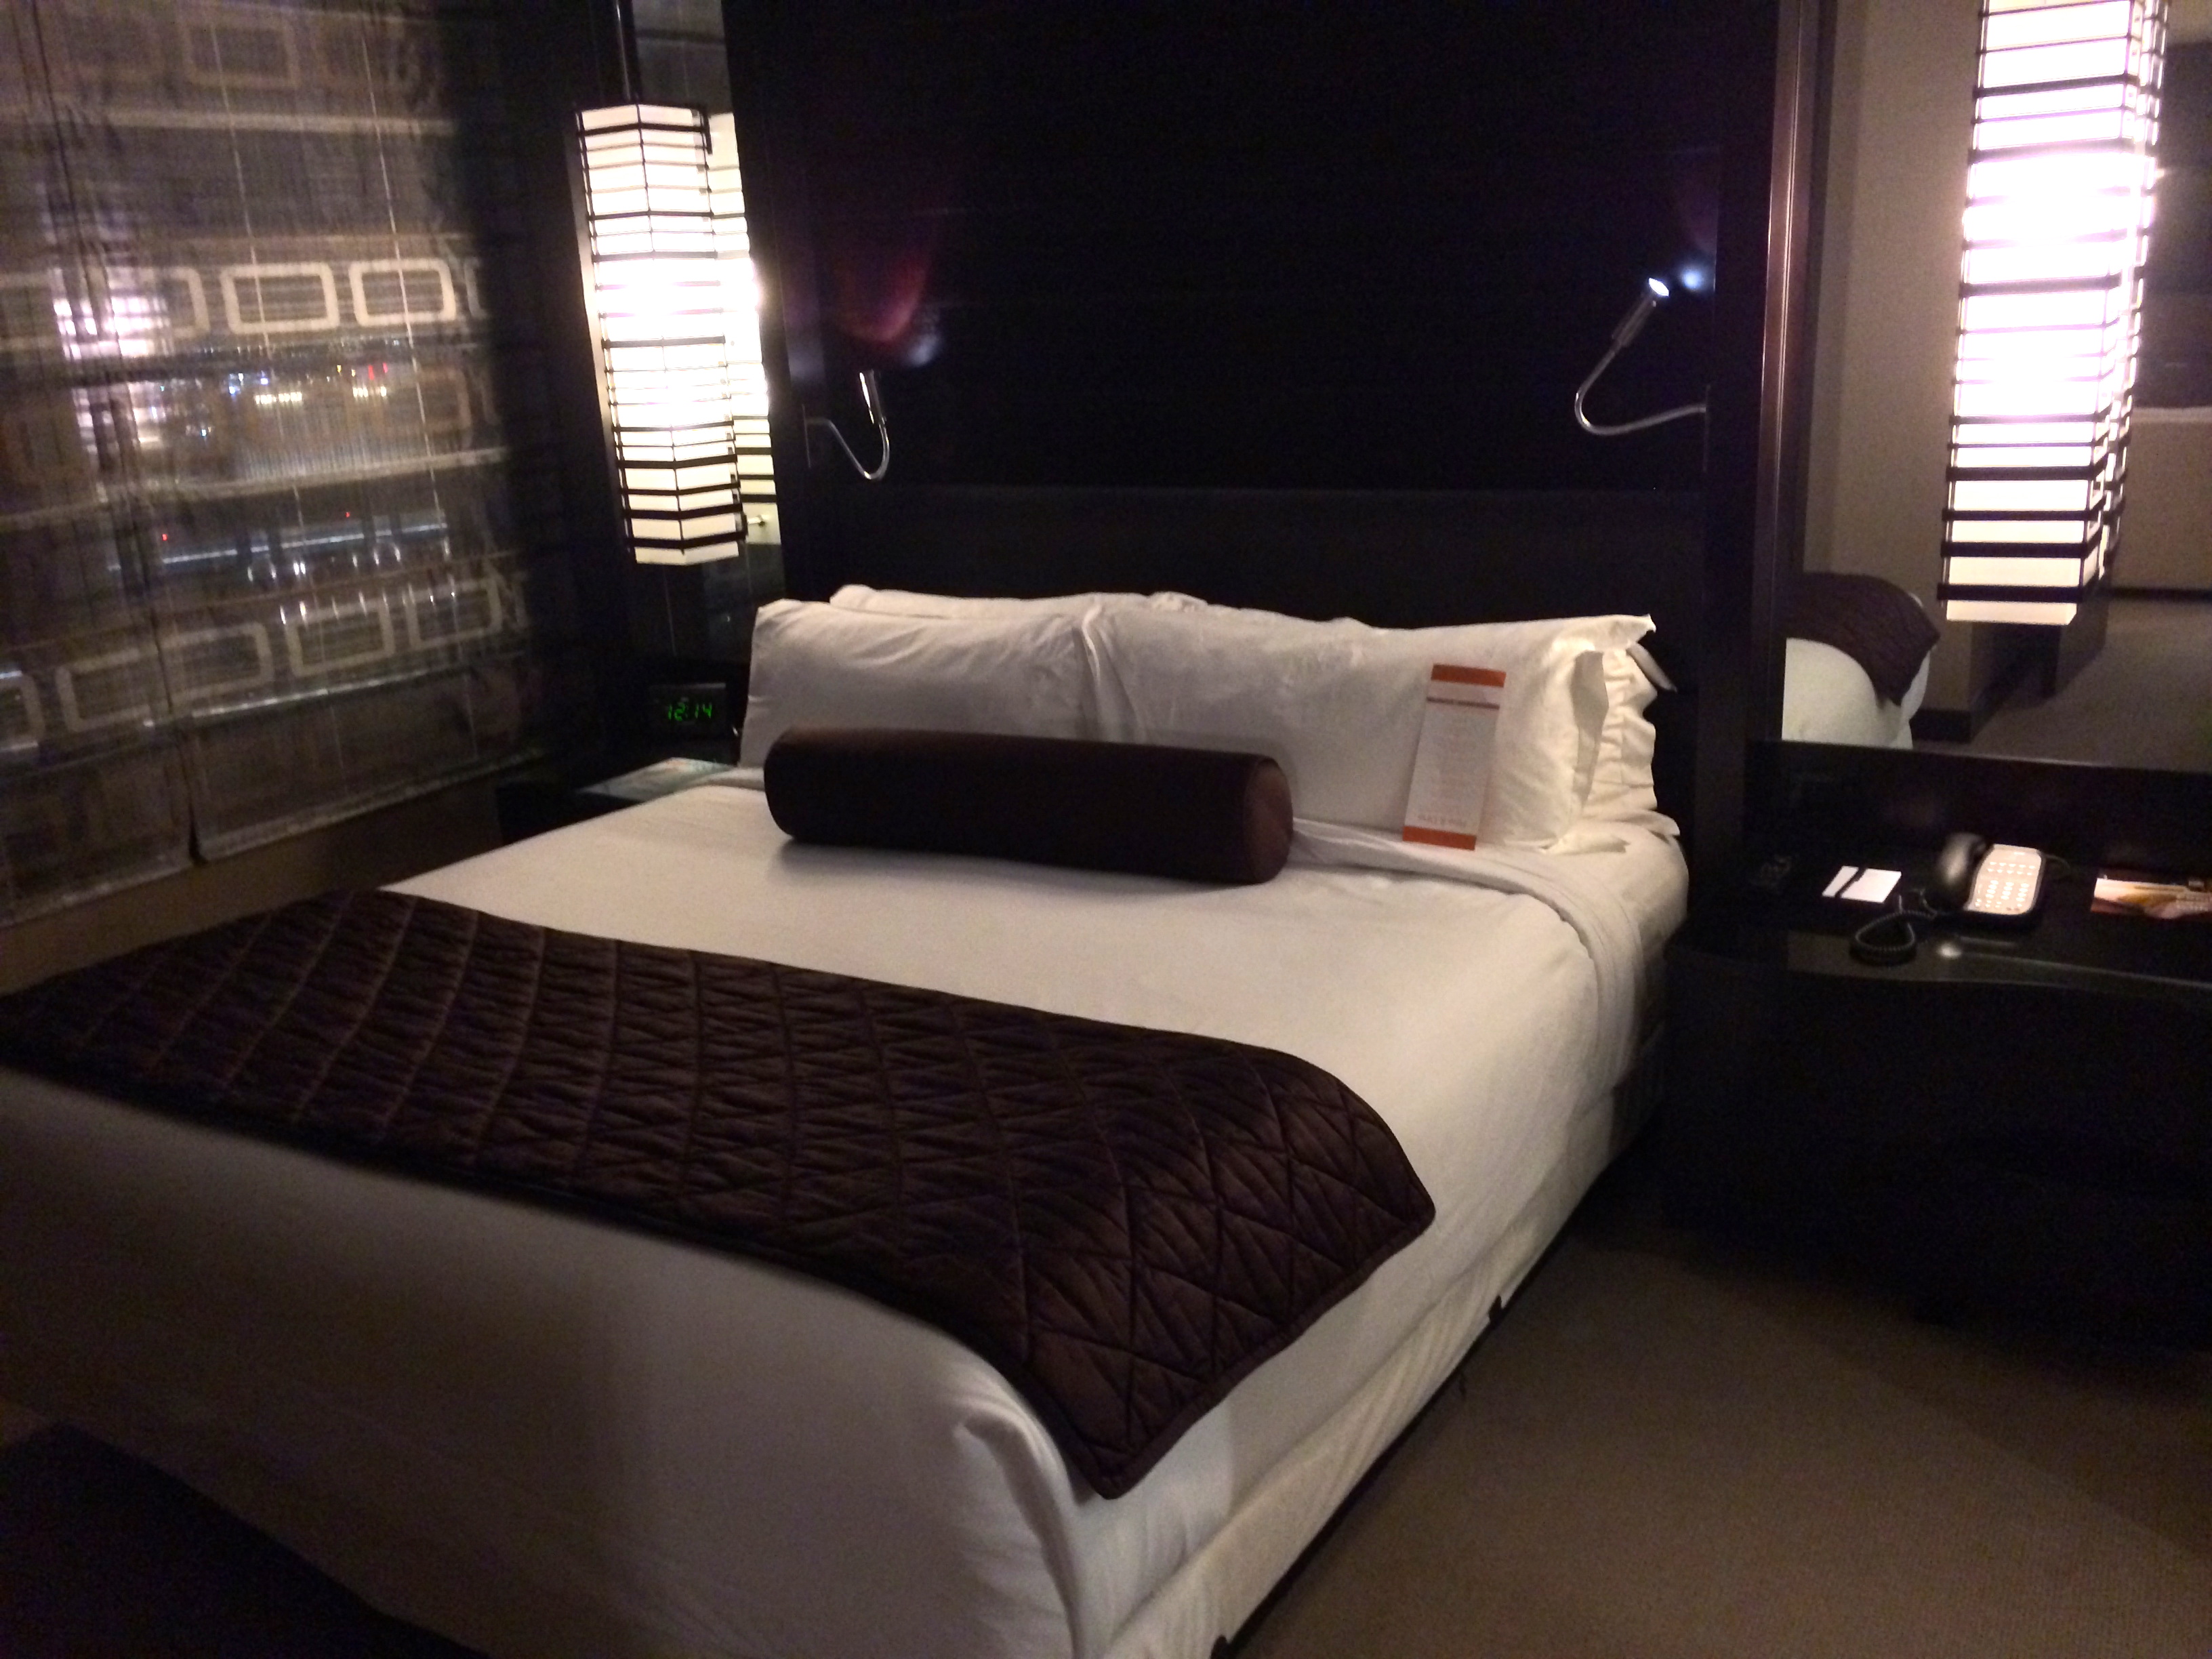 vdara 2 bedroom penthouse review